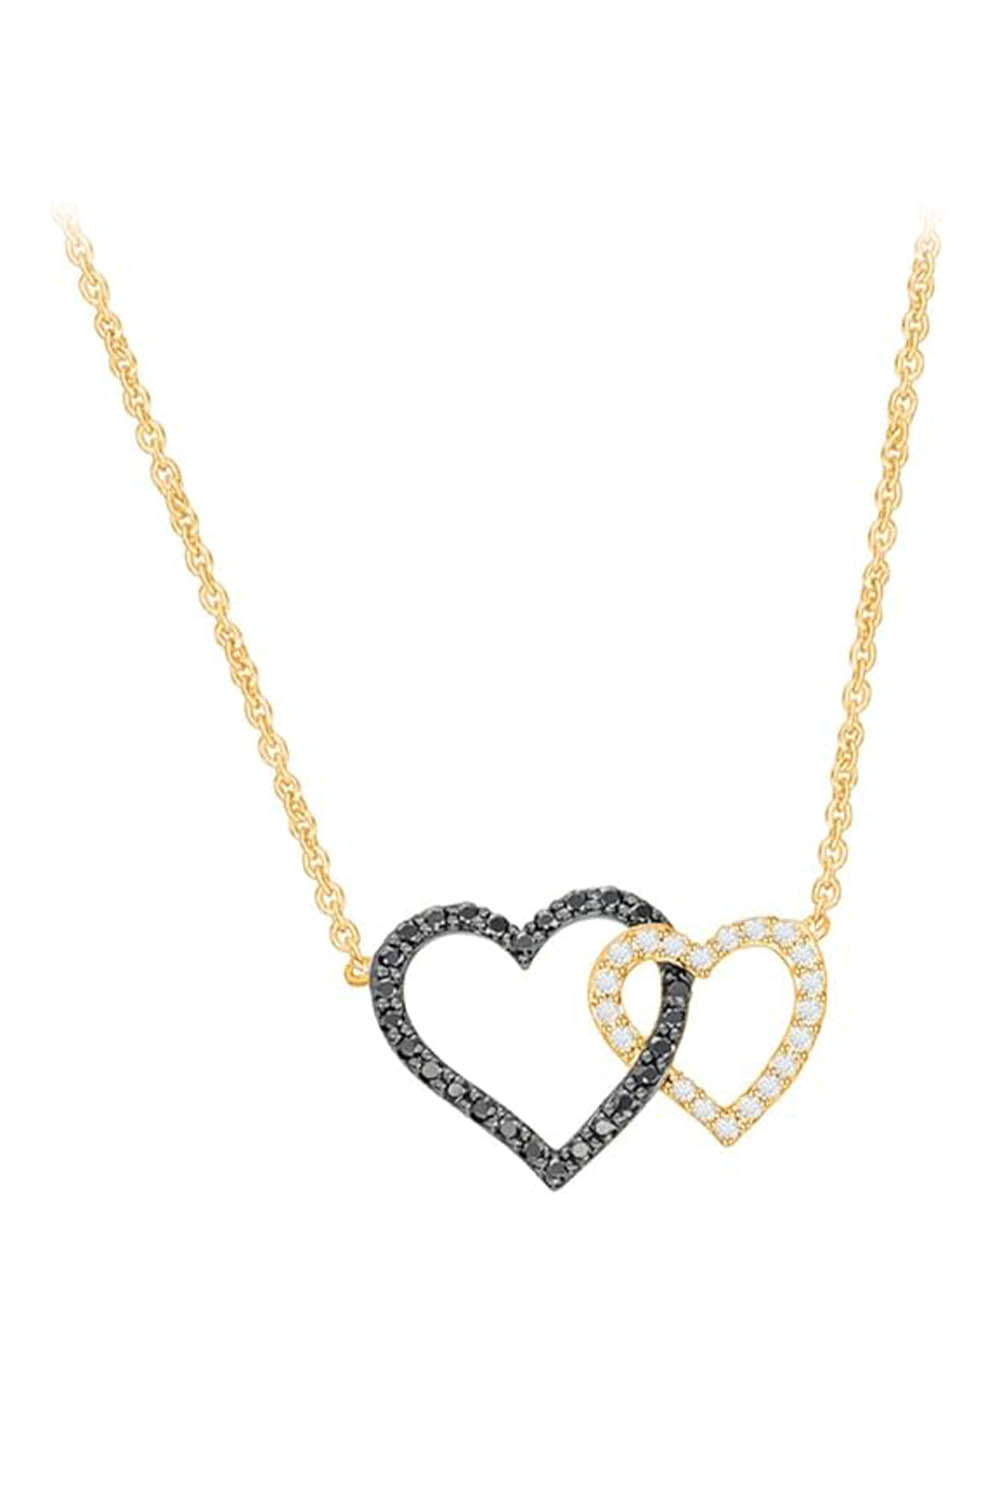 Yelow Gold Color Black and White Interlocking Heart Necklace